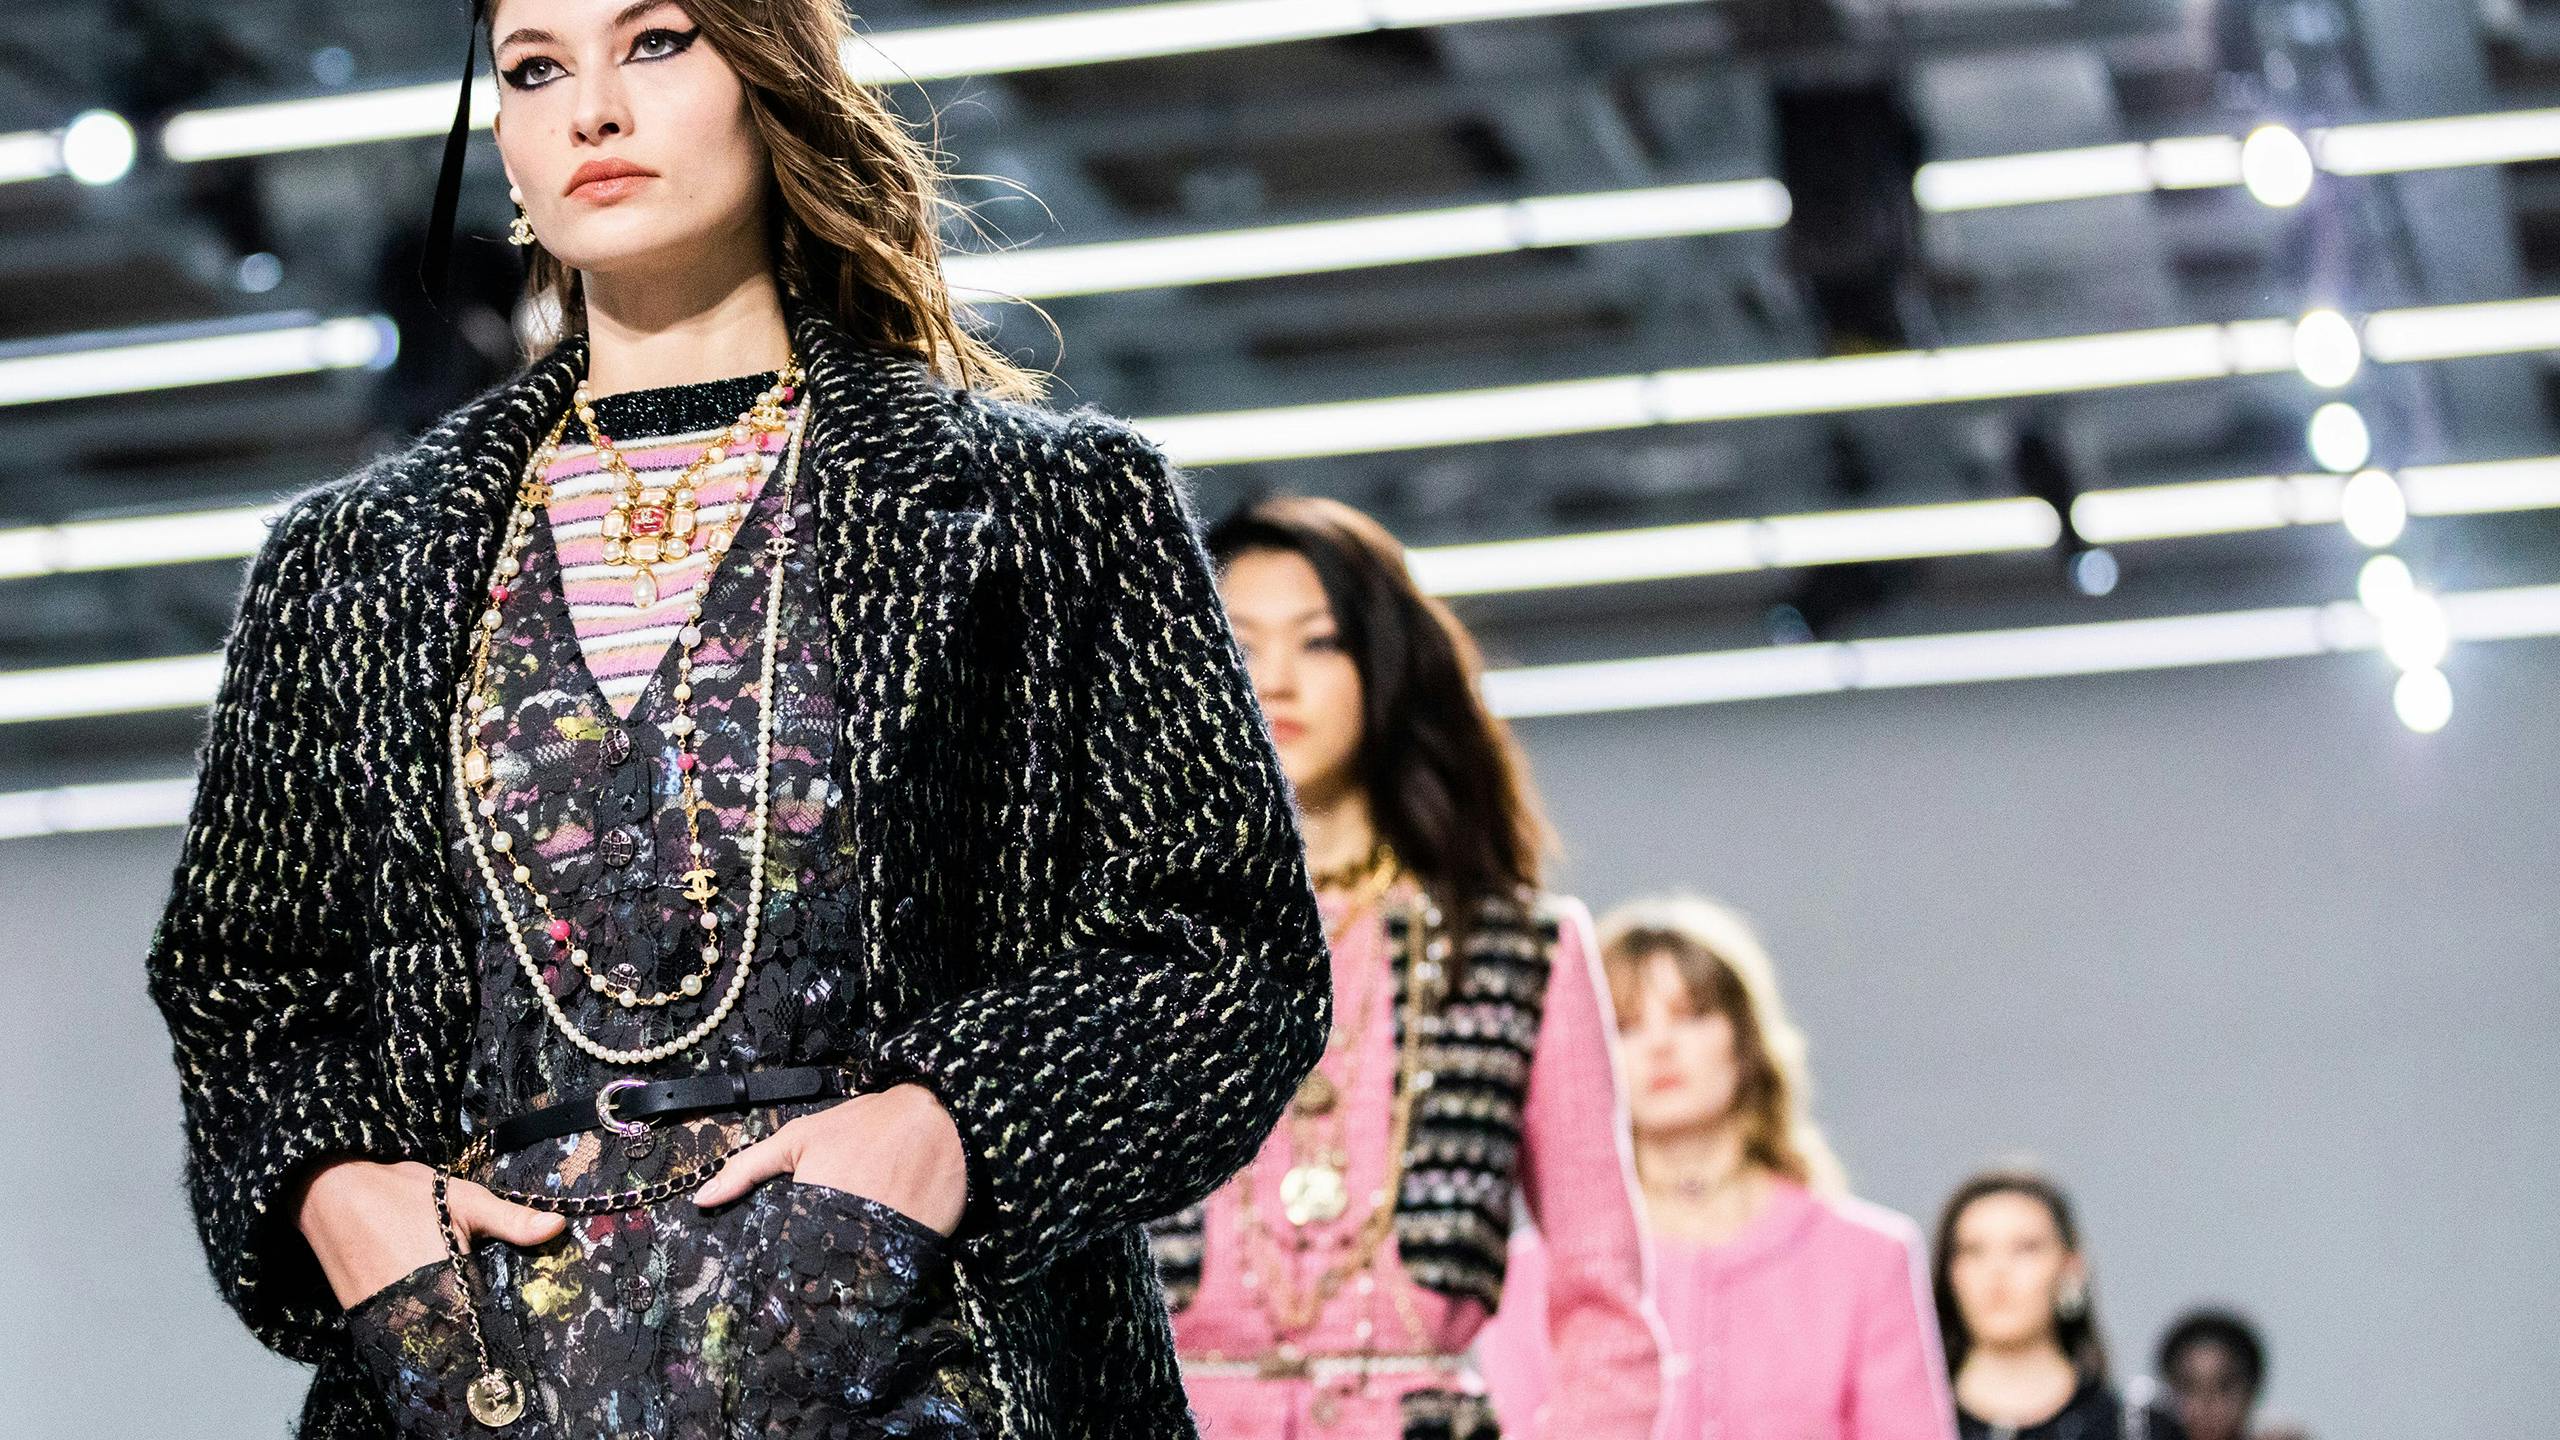 All the looks from Chanel Métiers d'Art 2021/22 Collection